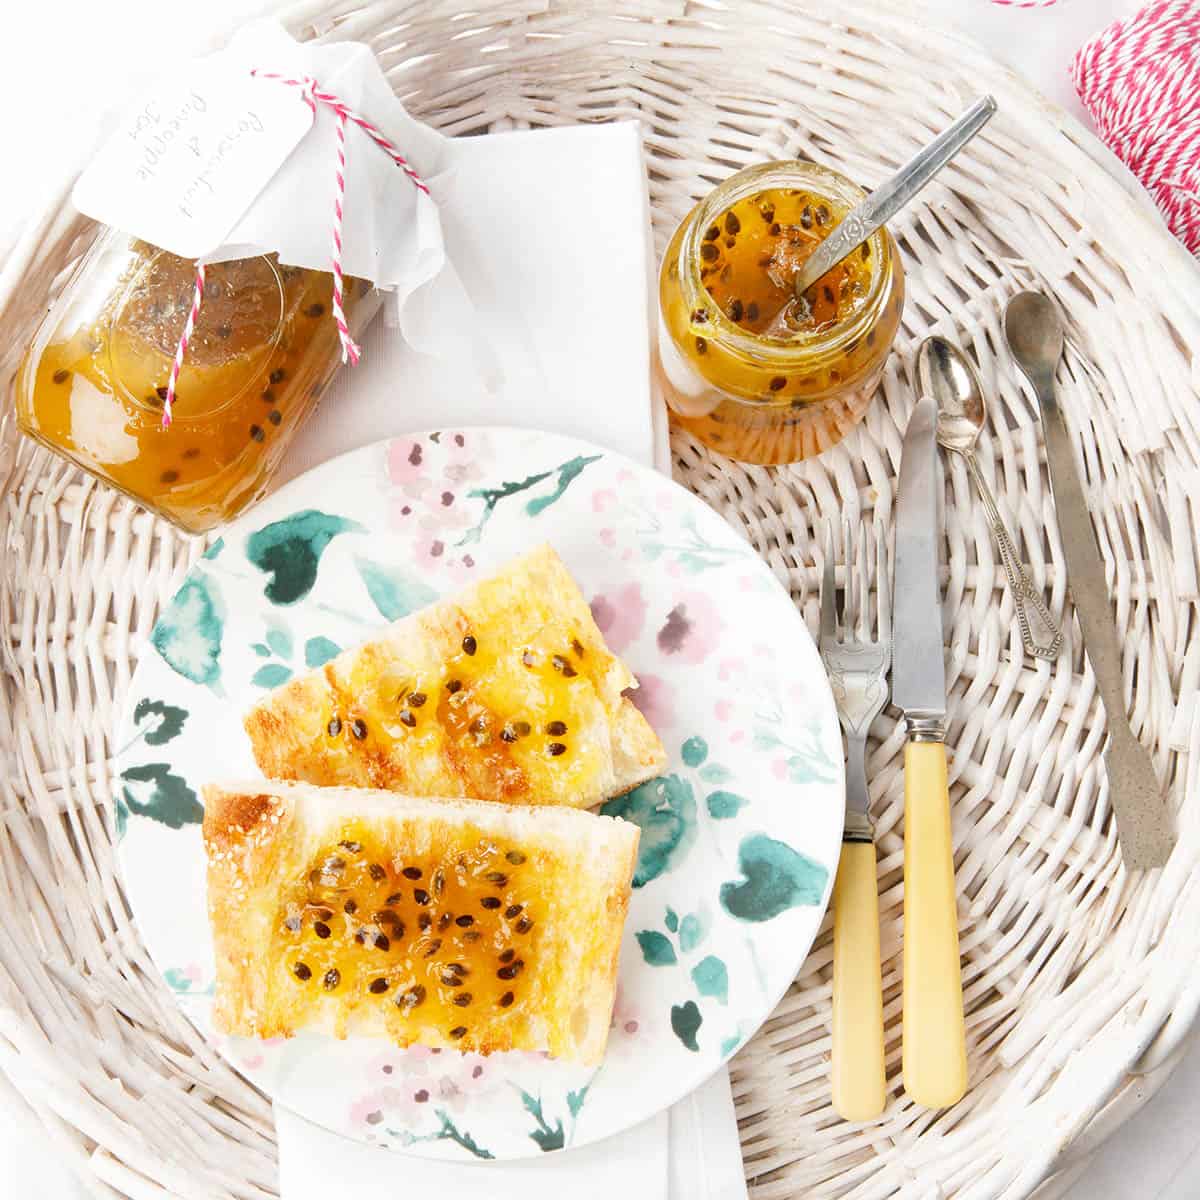 Passionfruit Jam Thermomix Style